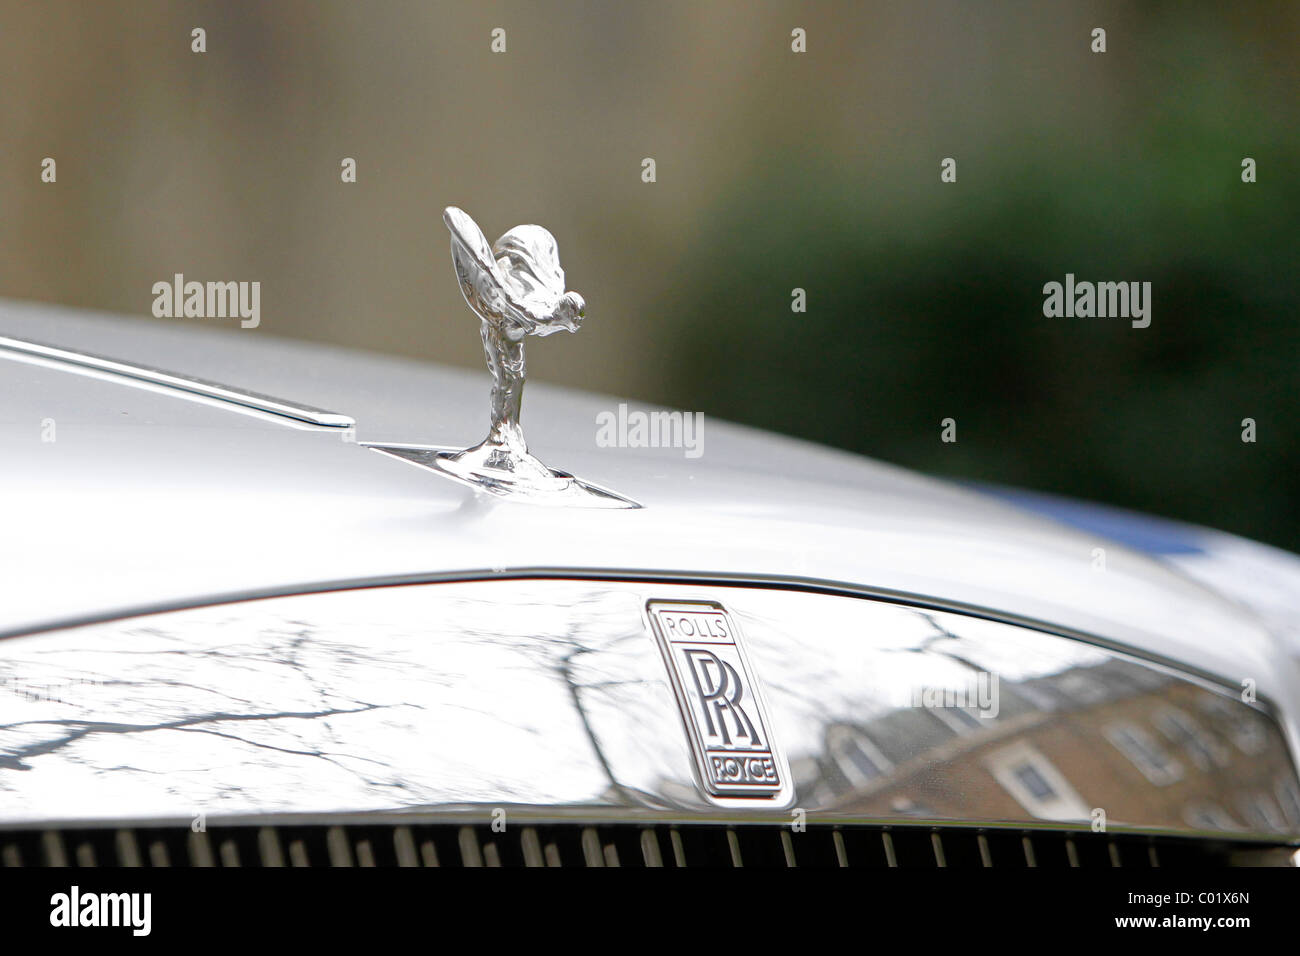 The Spirit of Ecstasy on the front of a Rolls Royce Stock Photo